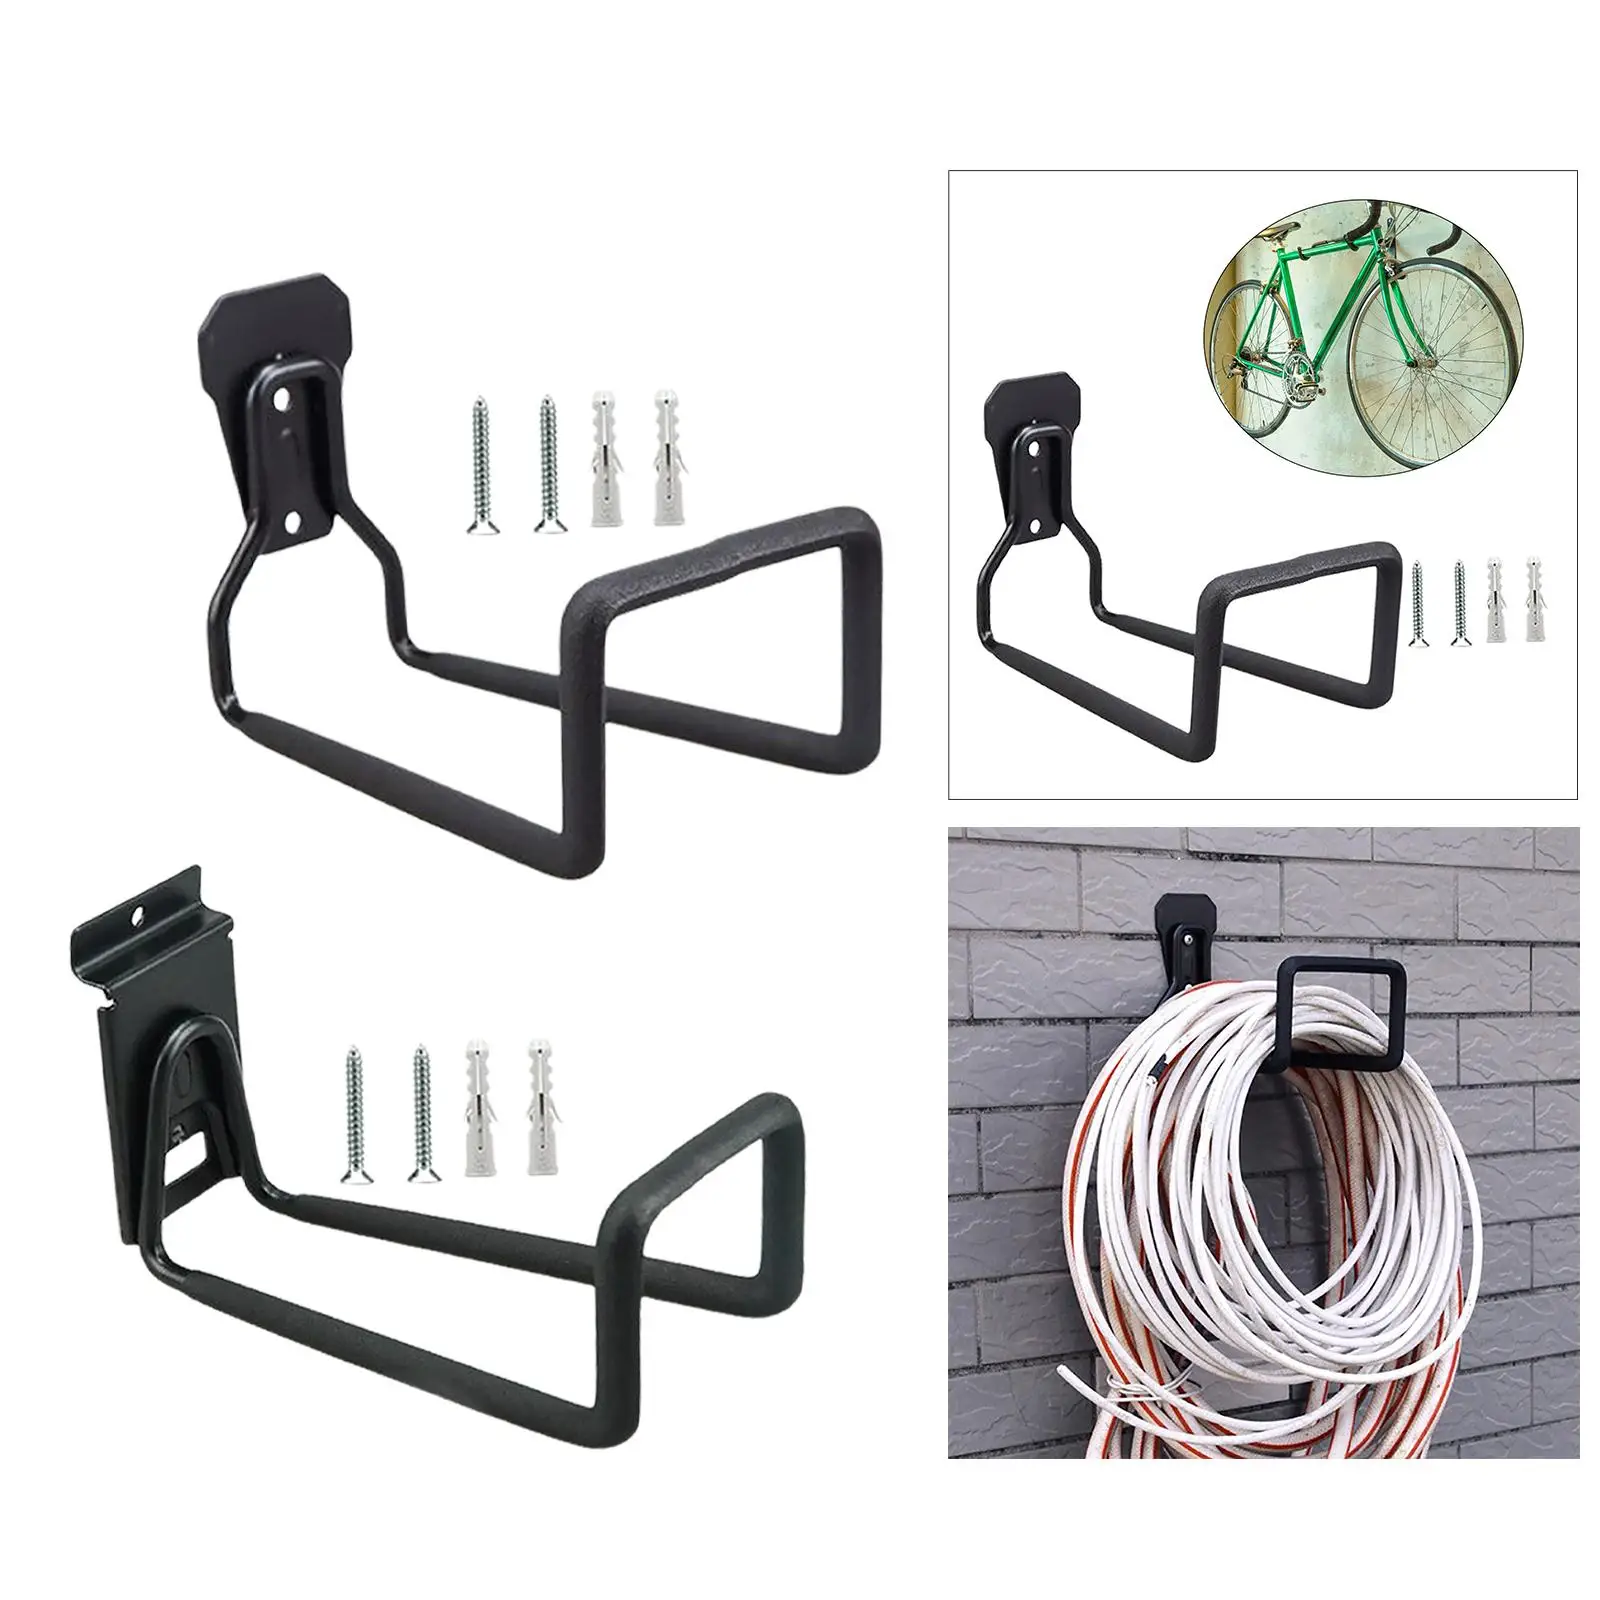 Metal Hose Reel Water Pipe Hanger Hose Organizer Wall Mounted for Home